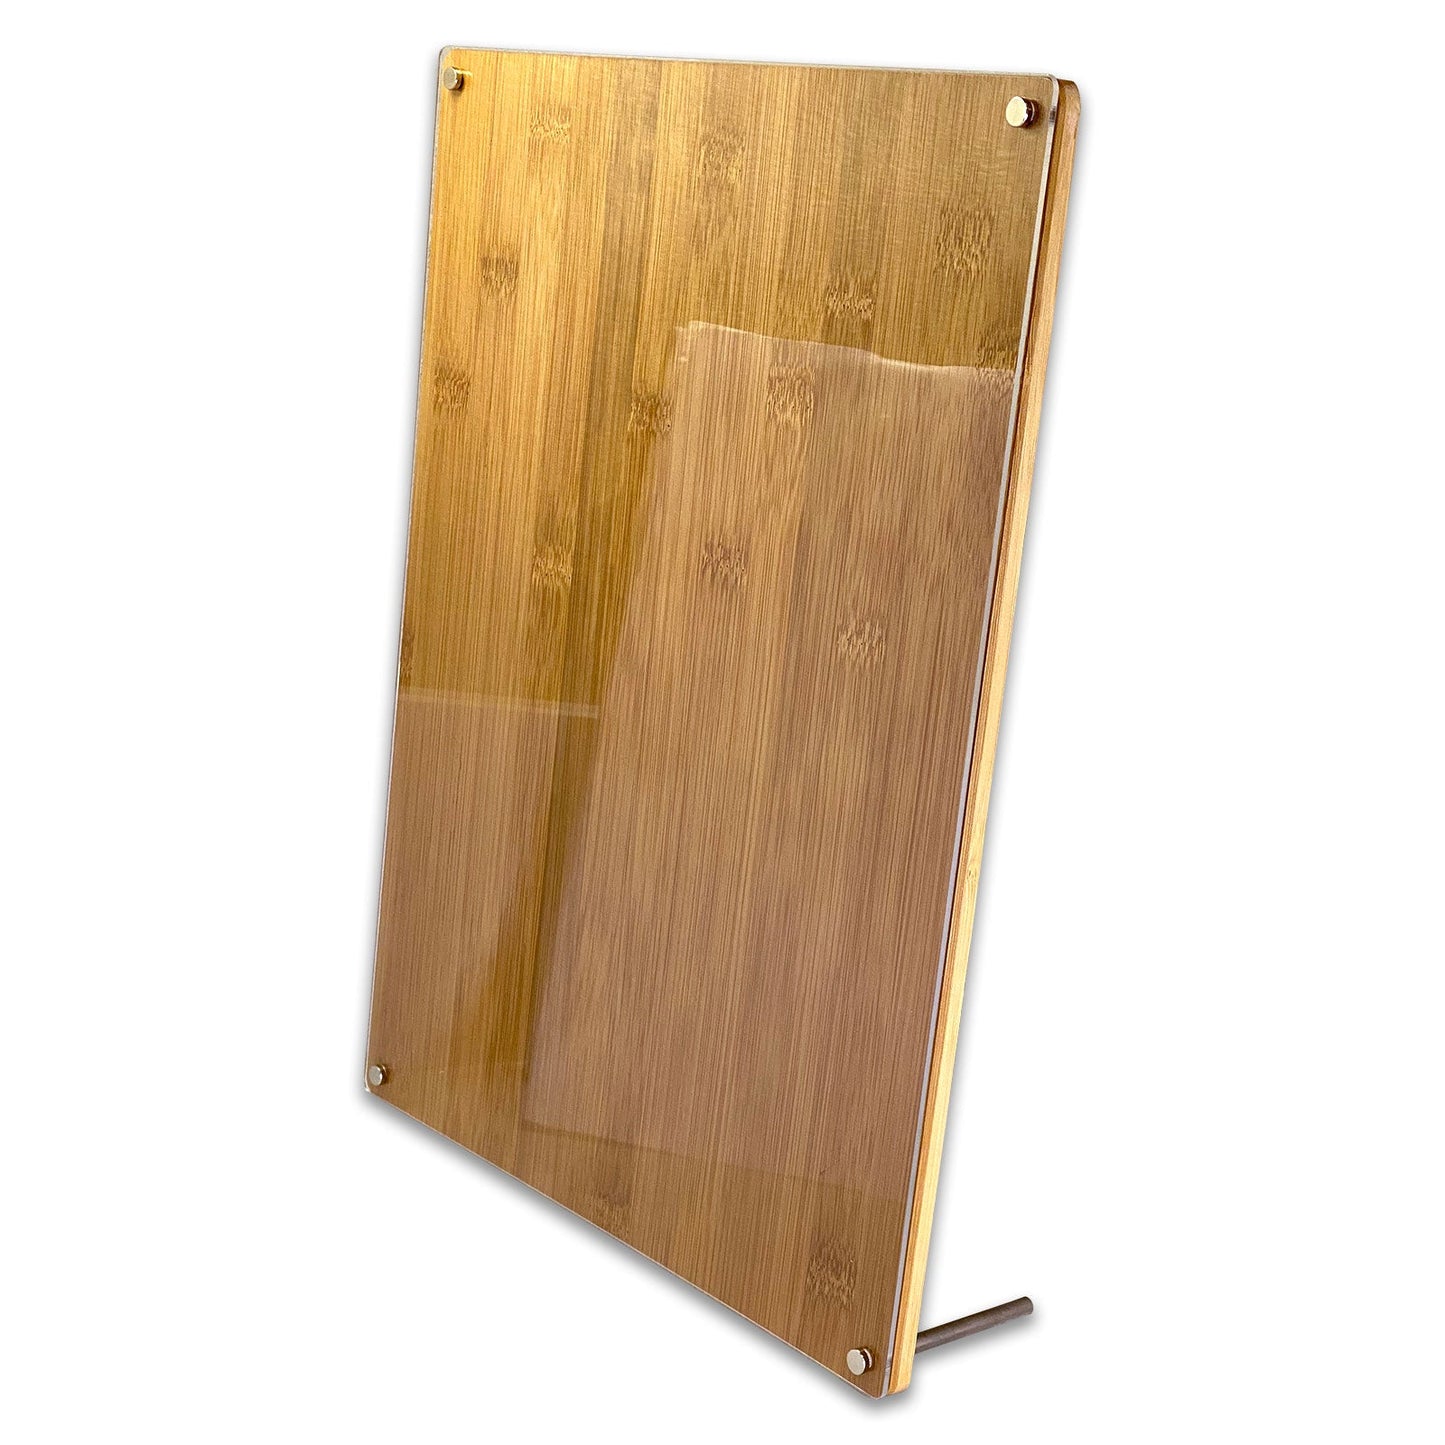 11" x 14" Bamboo and Acrylic Sign Holder Display Frame